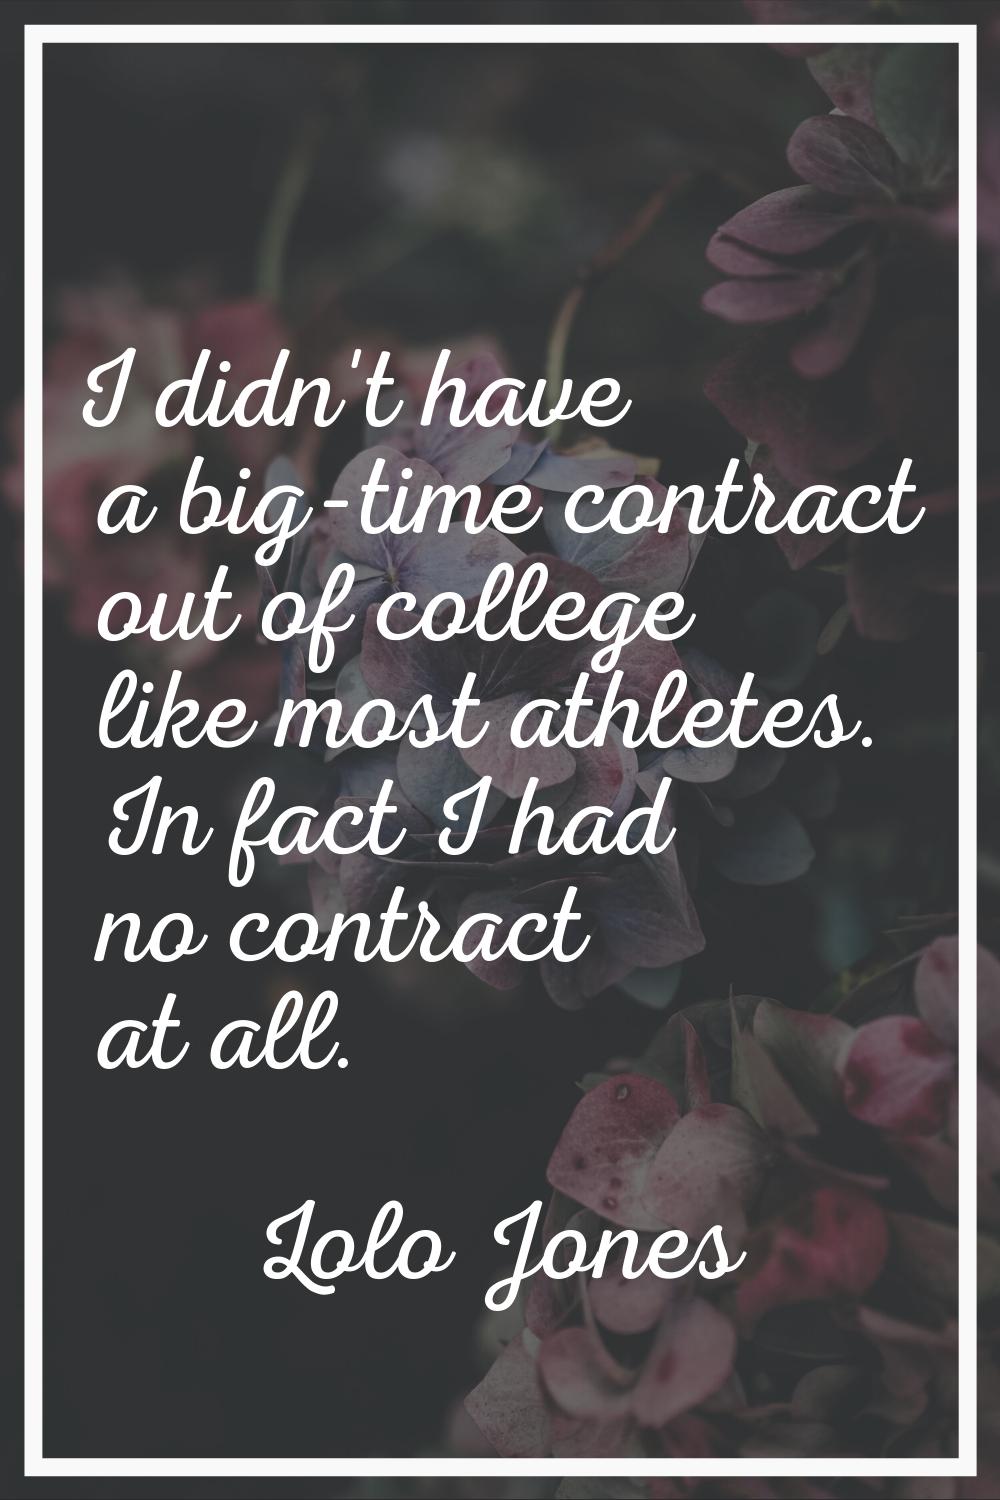 I didn't have a big-time contract out of college like most athletes. In fact I had no contract at a